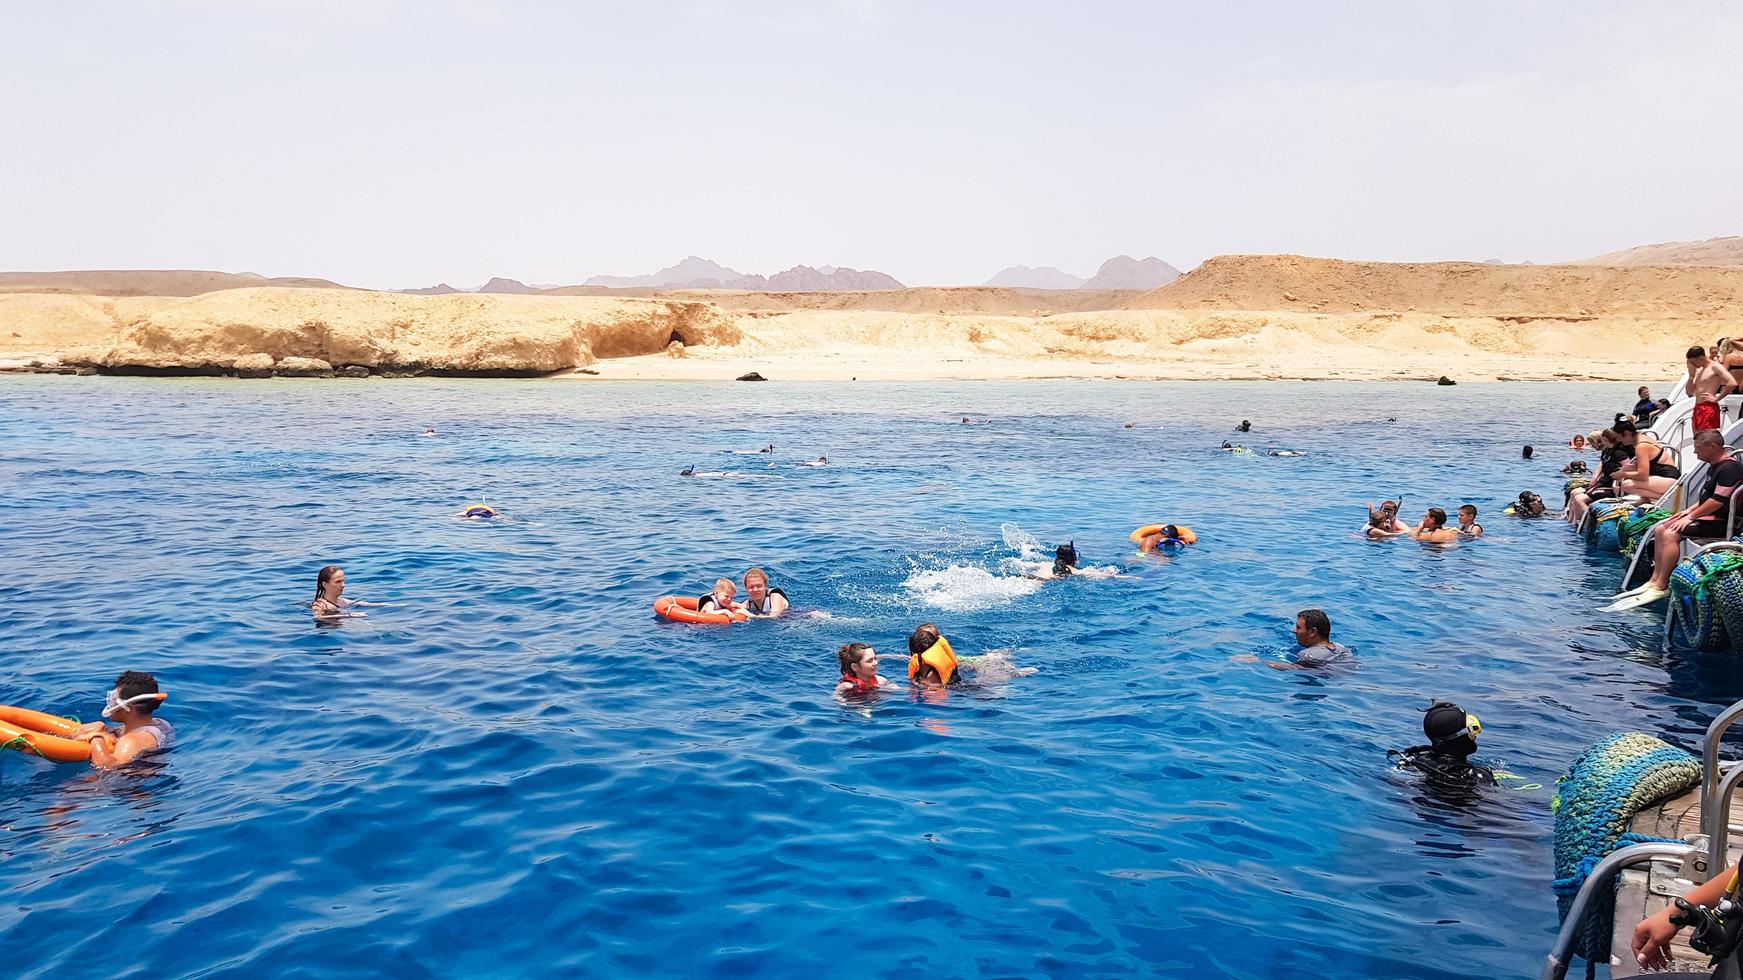 Egypt, Sharm El Sheikh - September 20, 2019. A group of tourists diving with a mask and snorkel are looking at the beautiful and colorful sea fish and coral reef in the Red Sea near the ship. photo